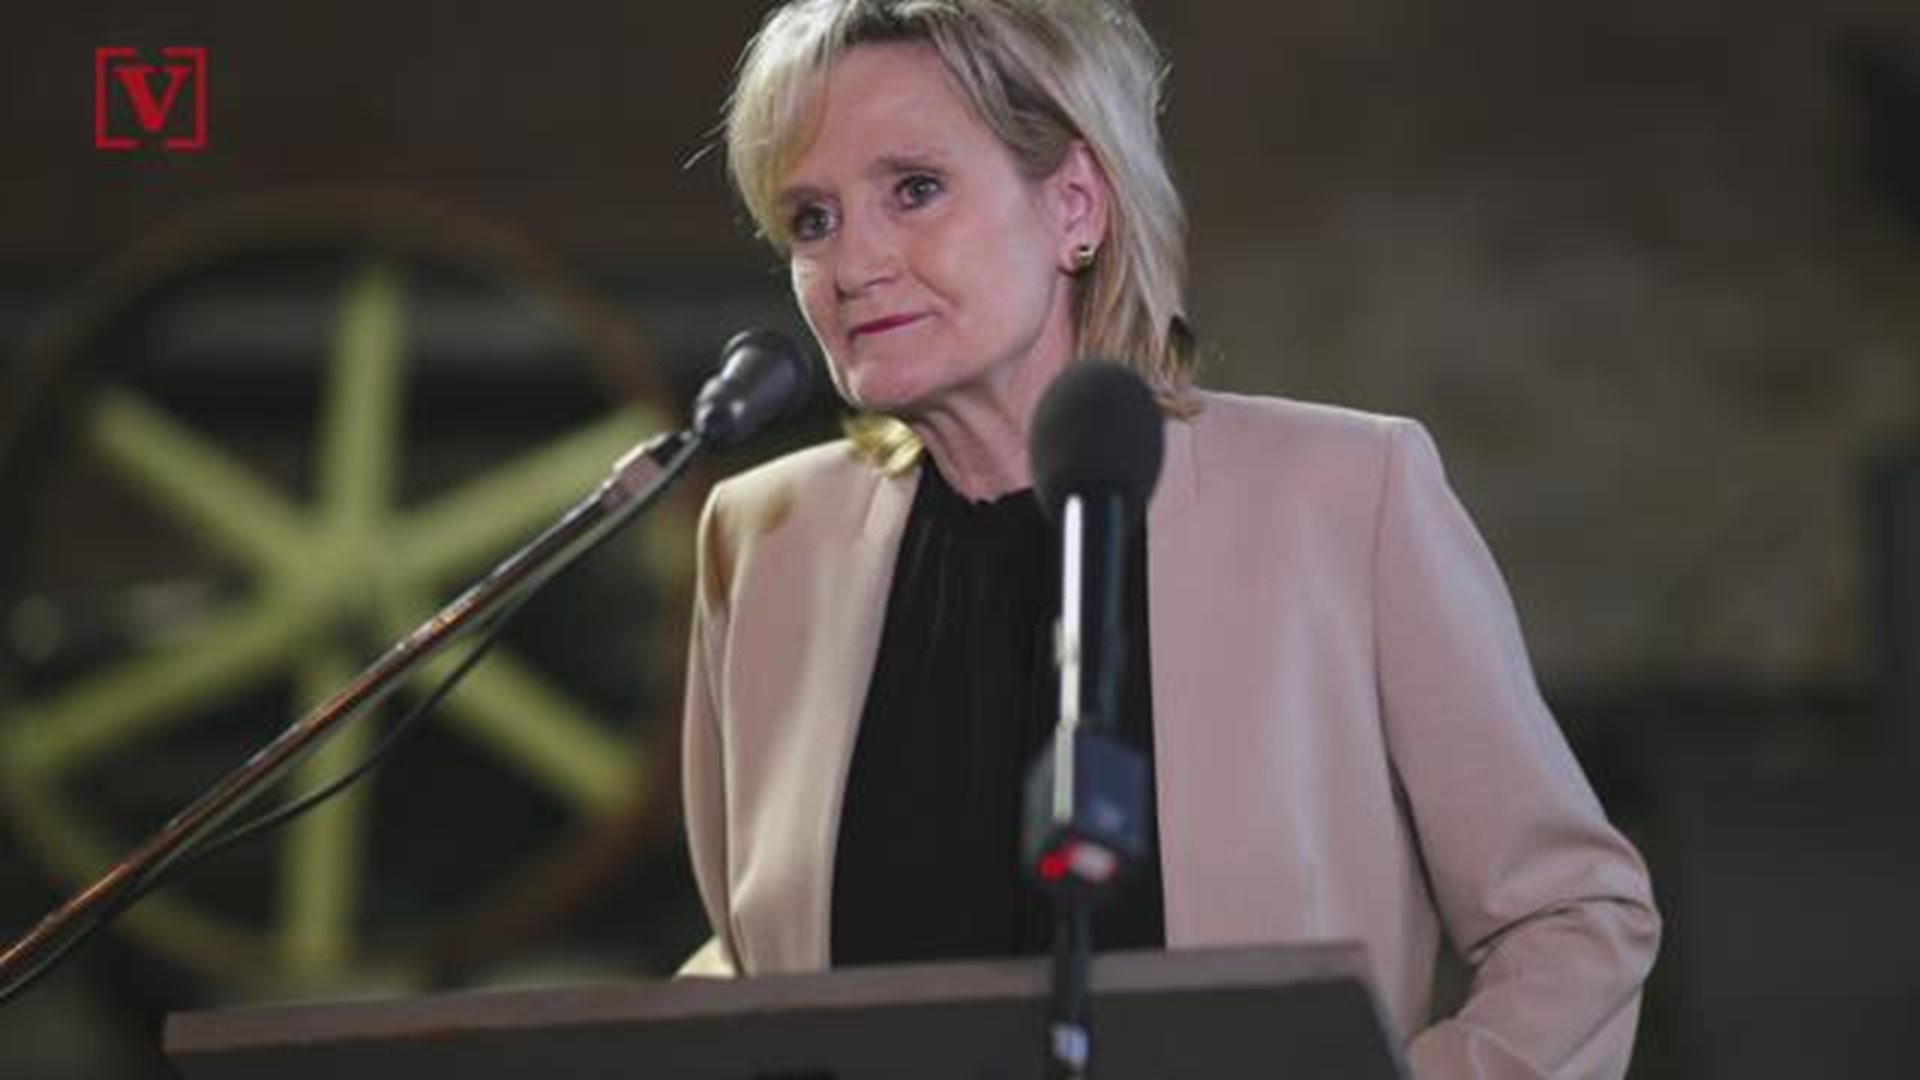 Major League Baseball becomes the latest high-profile donor to ask for contributions to be returned from Senator Cindy Hyde-Smith following her controversial reference to a public hanging on the campaign trail. Veuer's Justin Kircher has the story